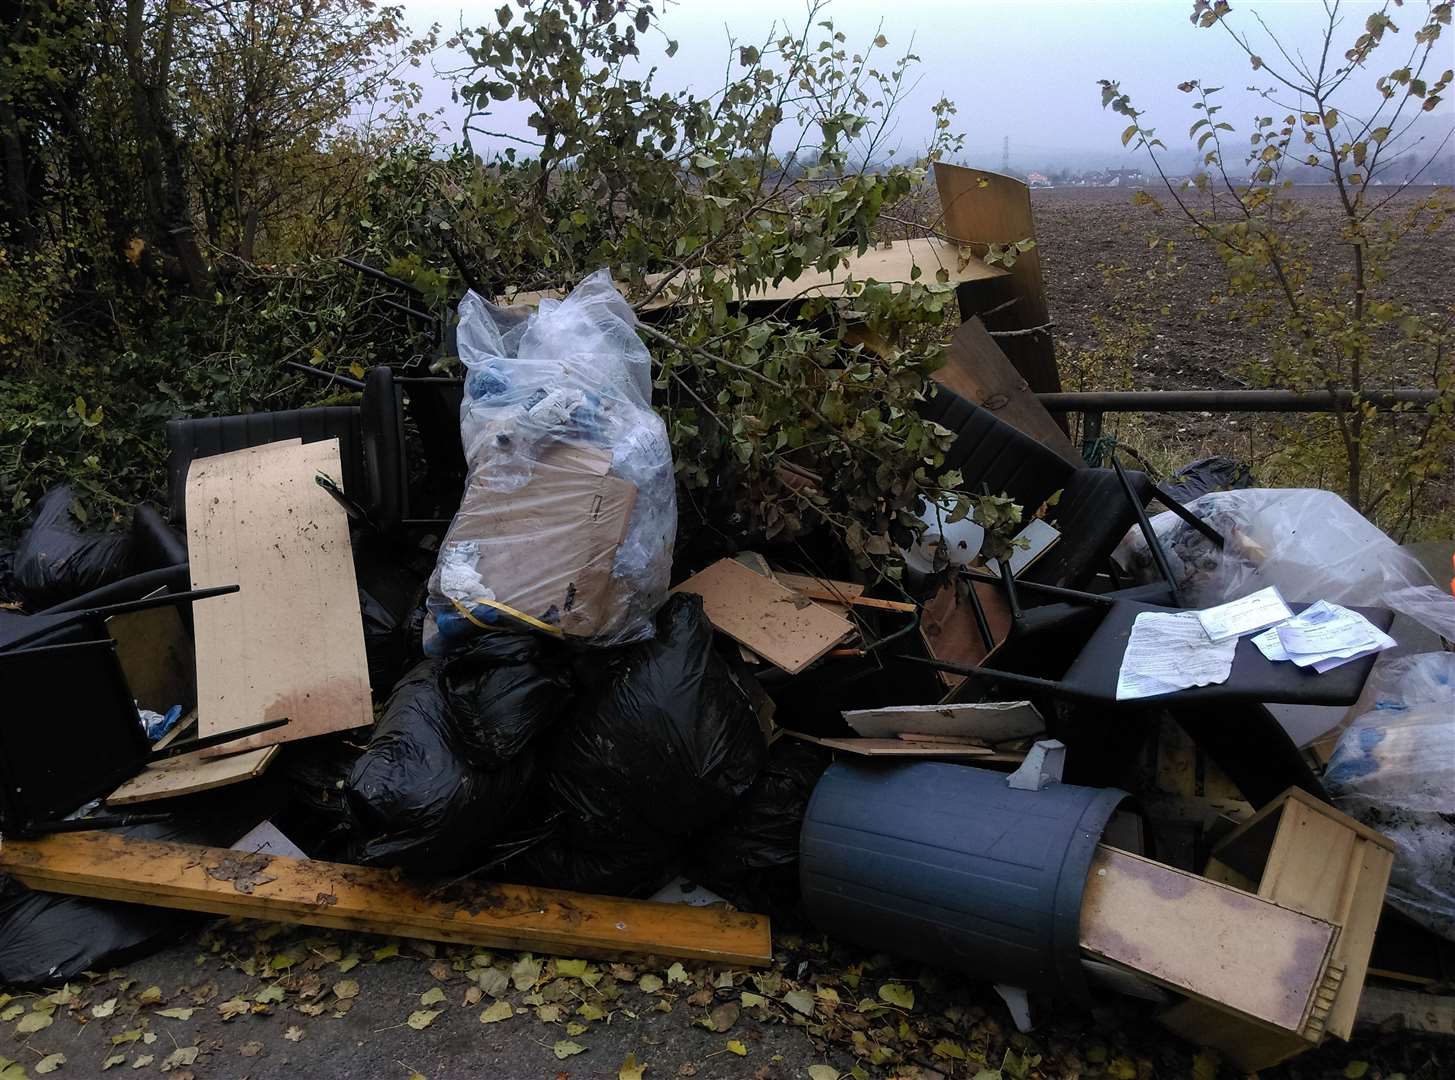 Some people believe there has been an increase in fly-tipping